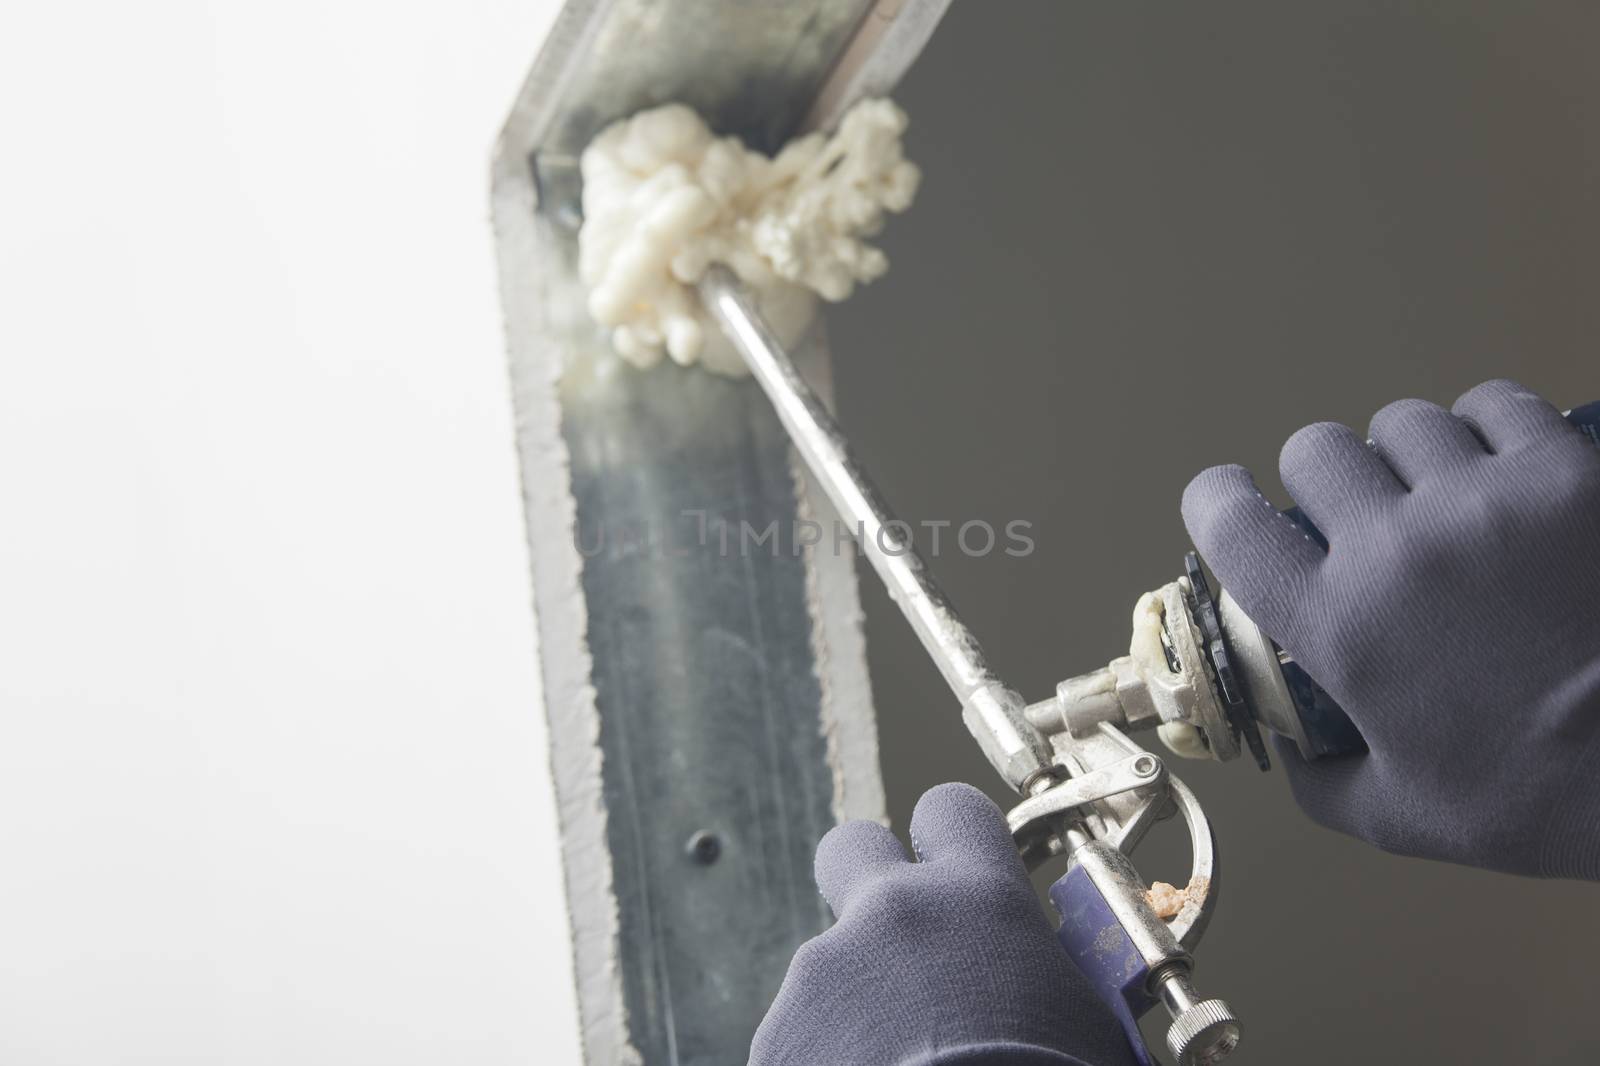 Construction site worker using a can of expanding foam to fix a doorway